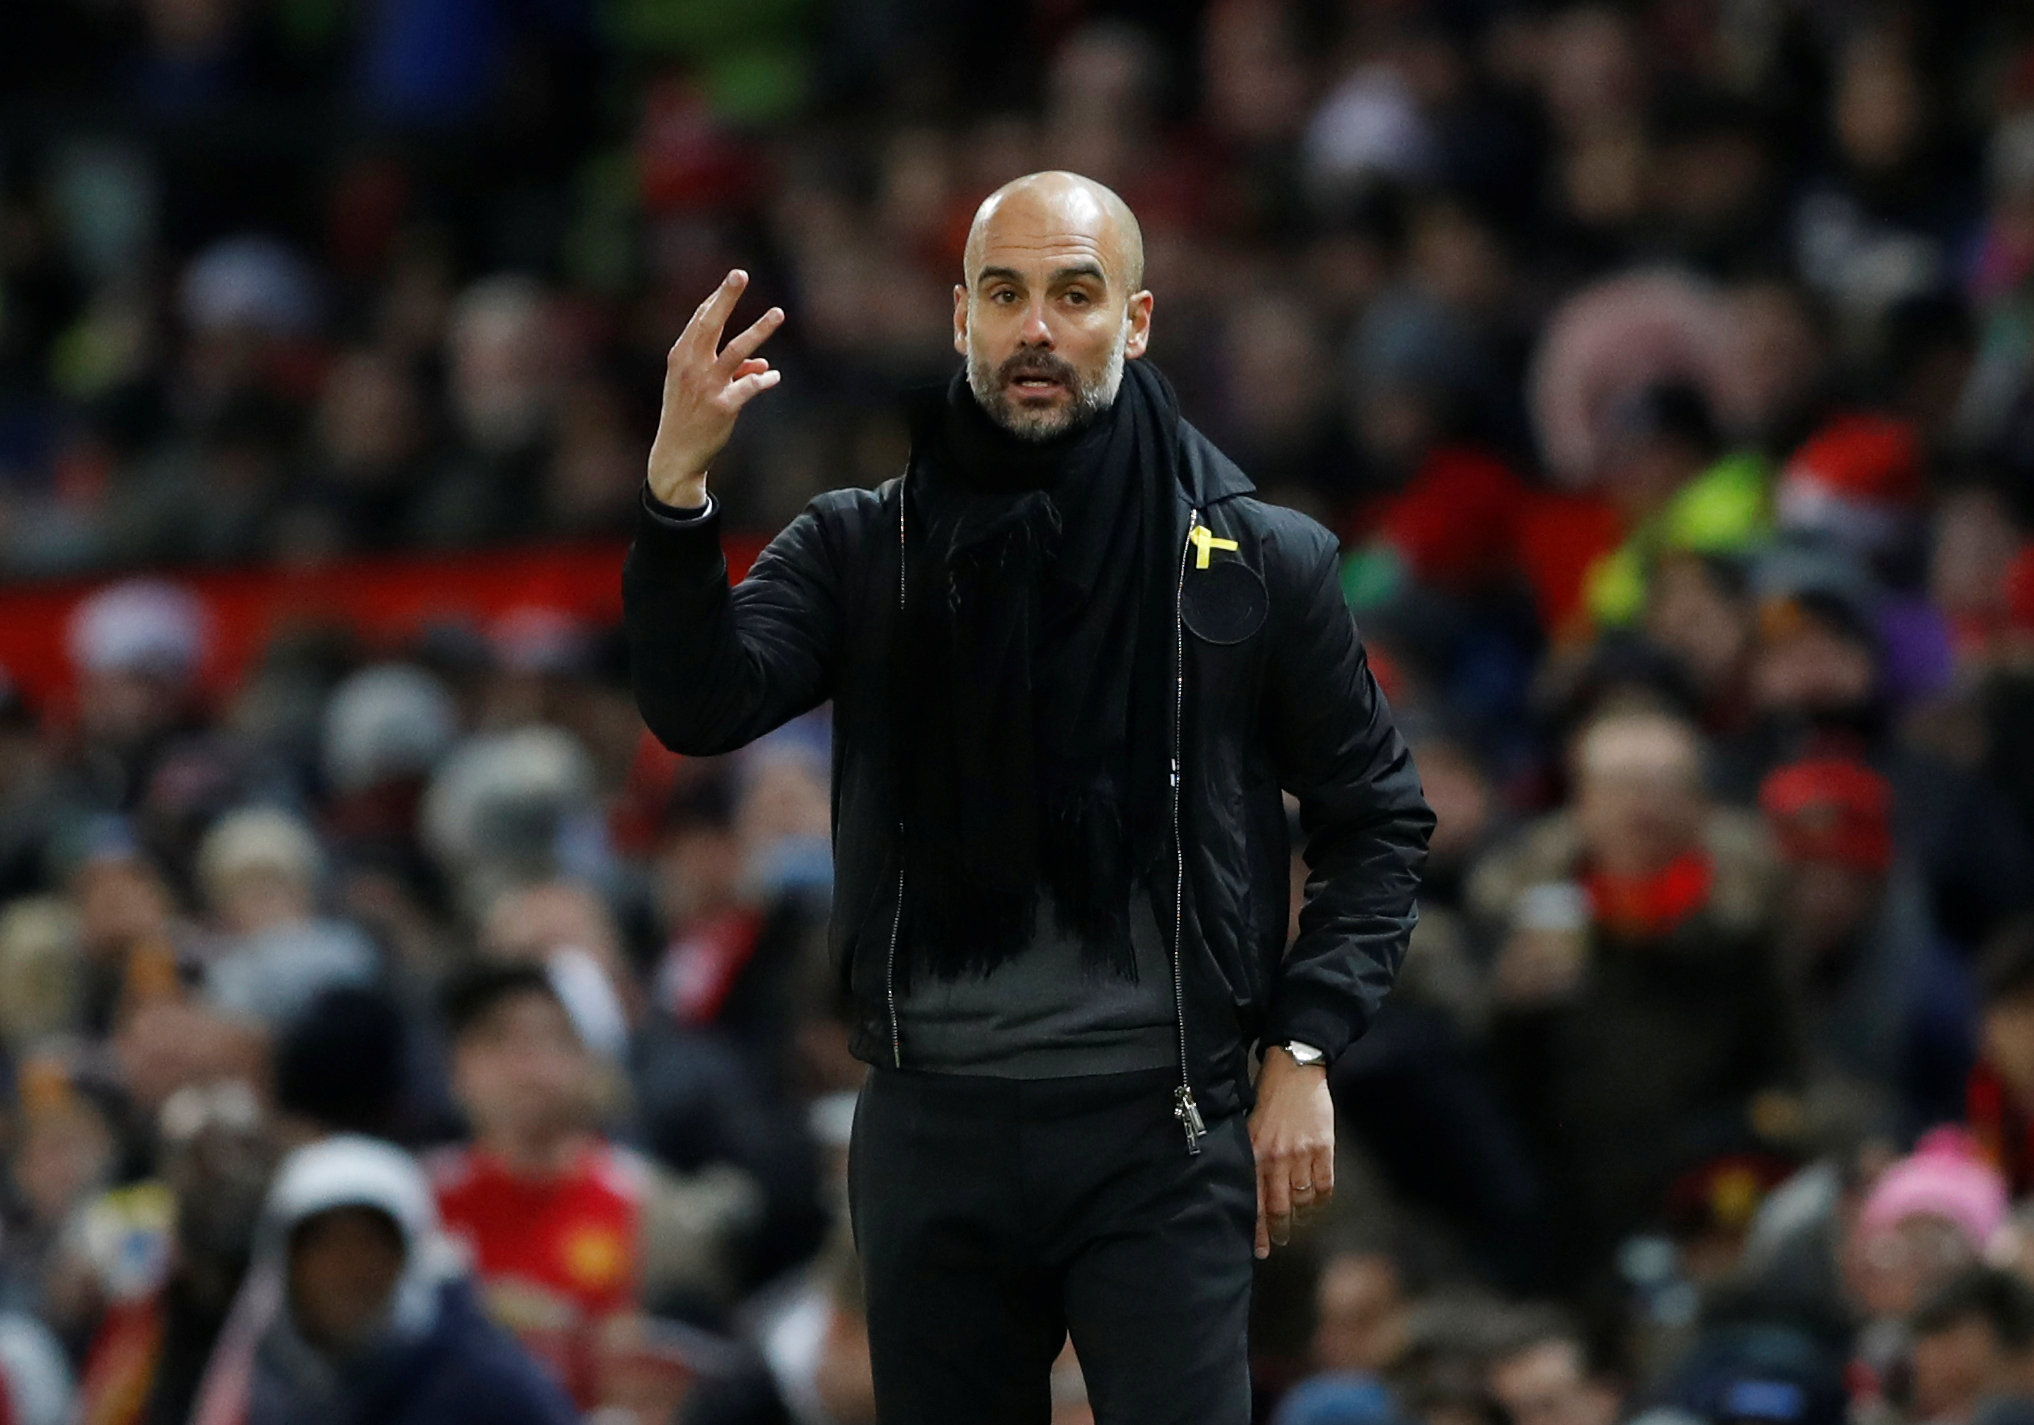 Football: Man City keen to strengthen defence in January